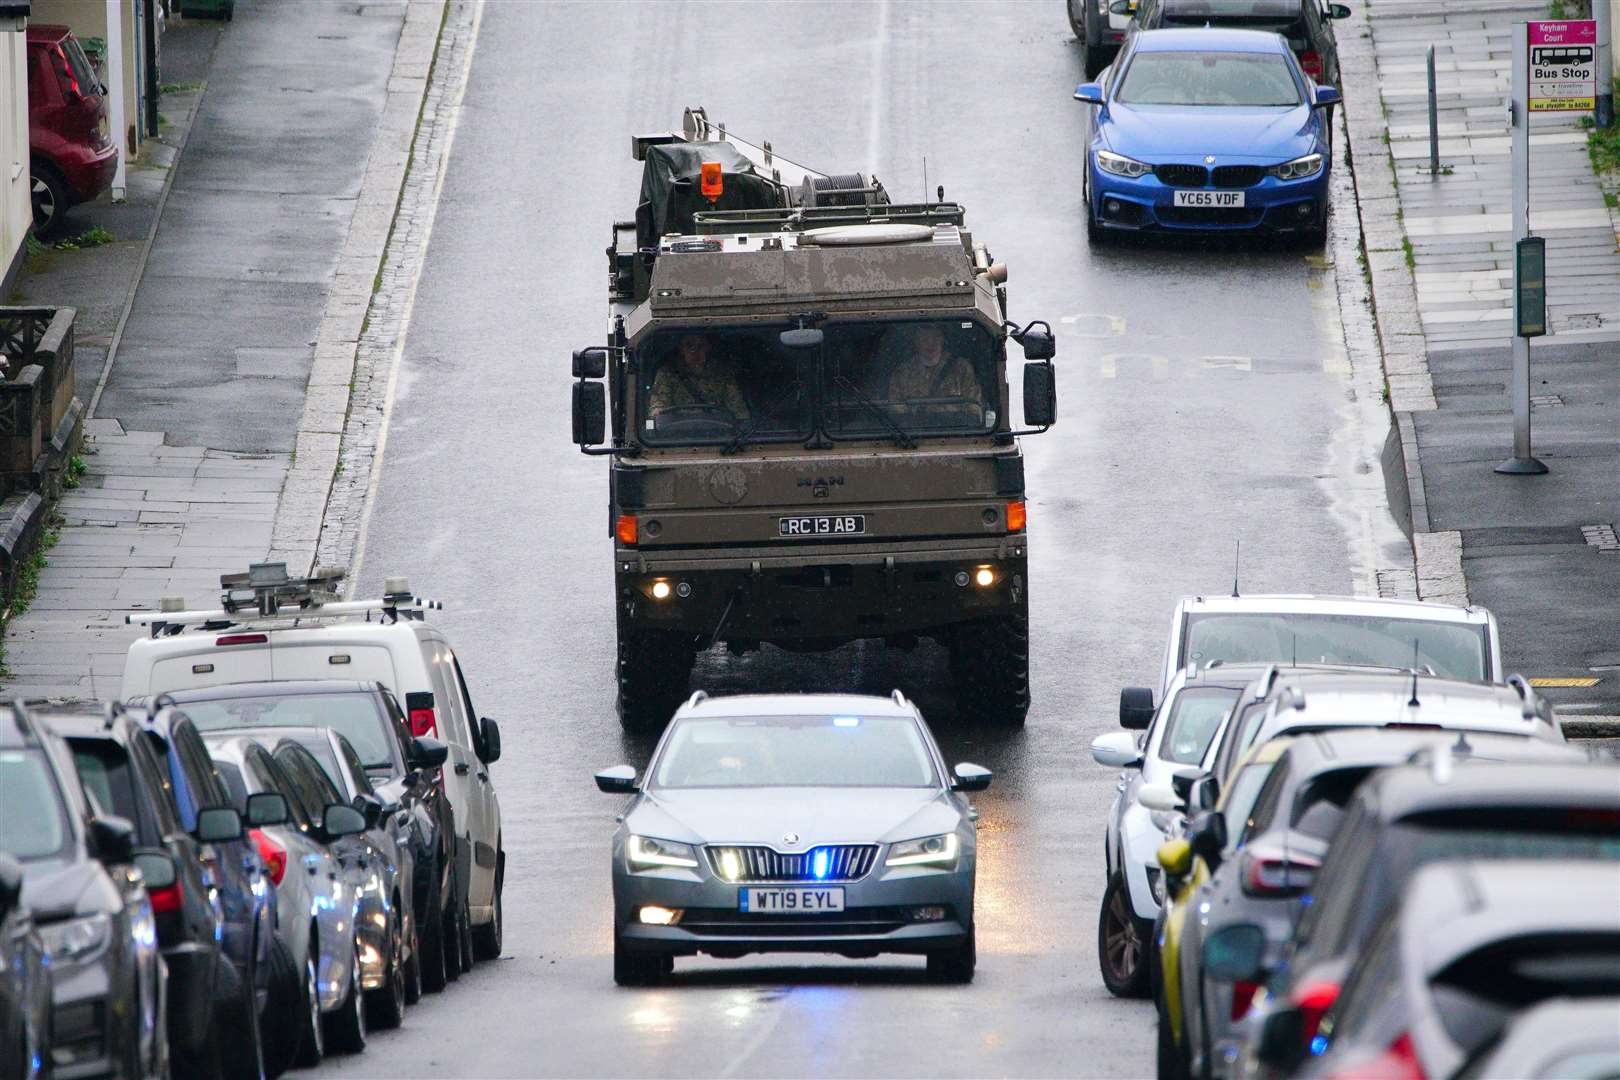 A military vehicle at the scene near St Michael Avenue, Plymouth (Ben Birchall/PA)